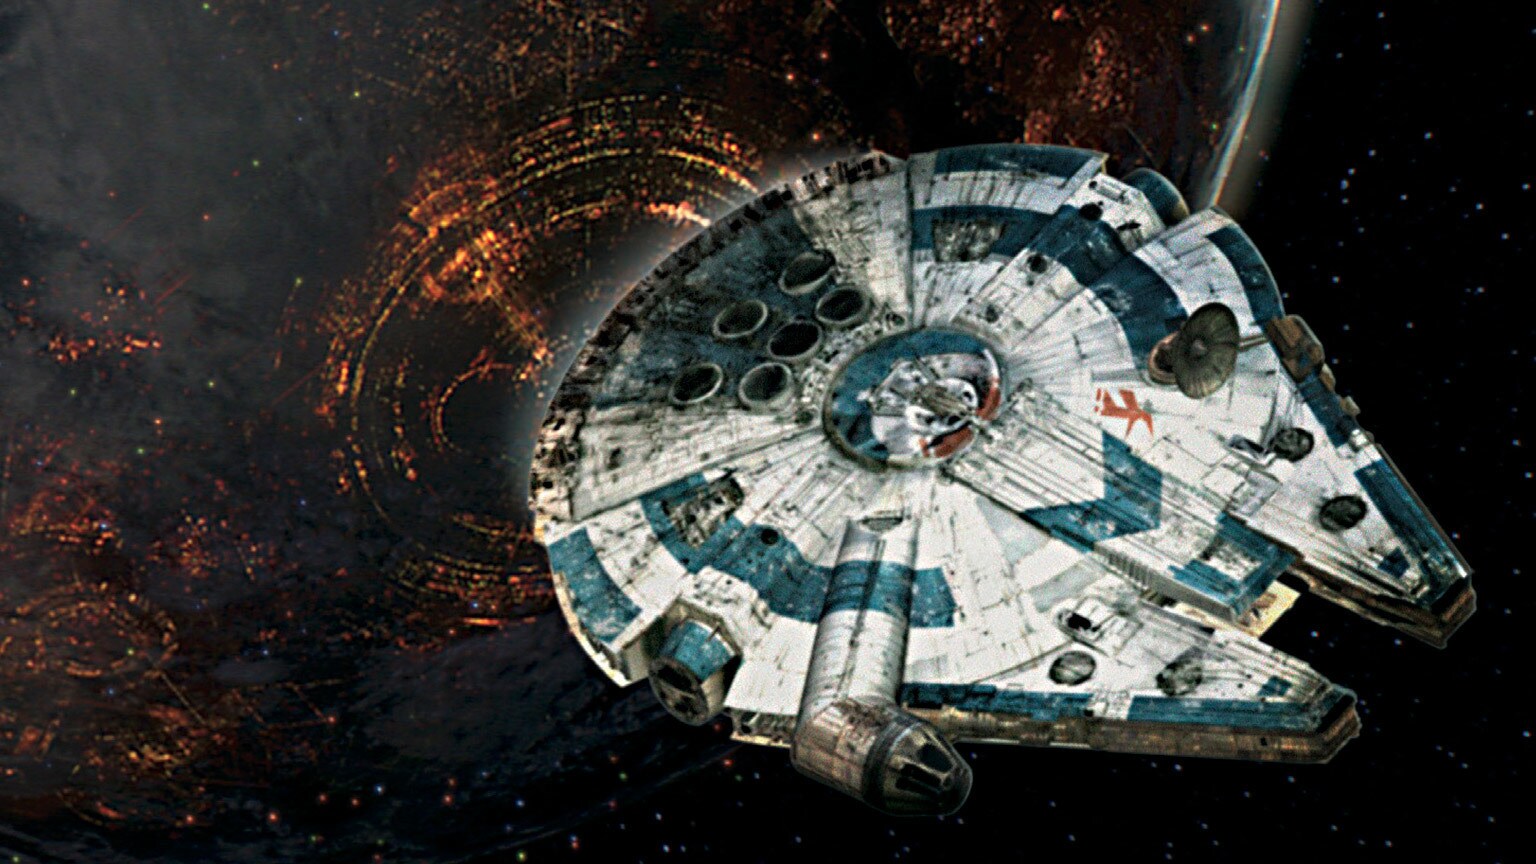 Everything You Need to Know to Fly the Millennium Falcon